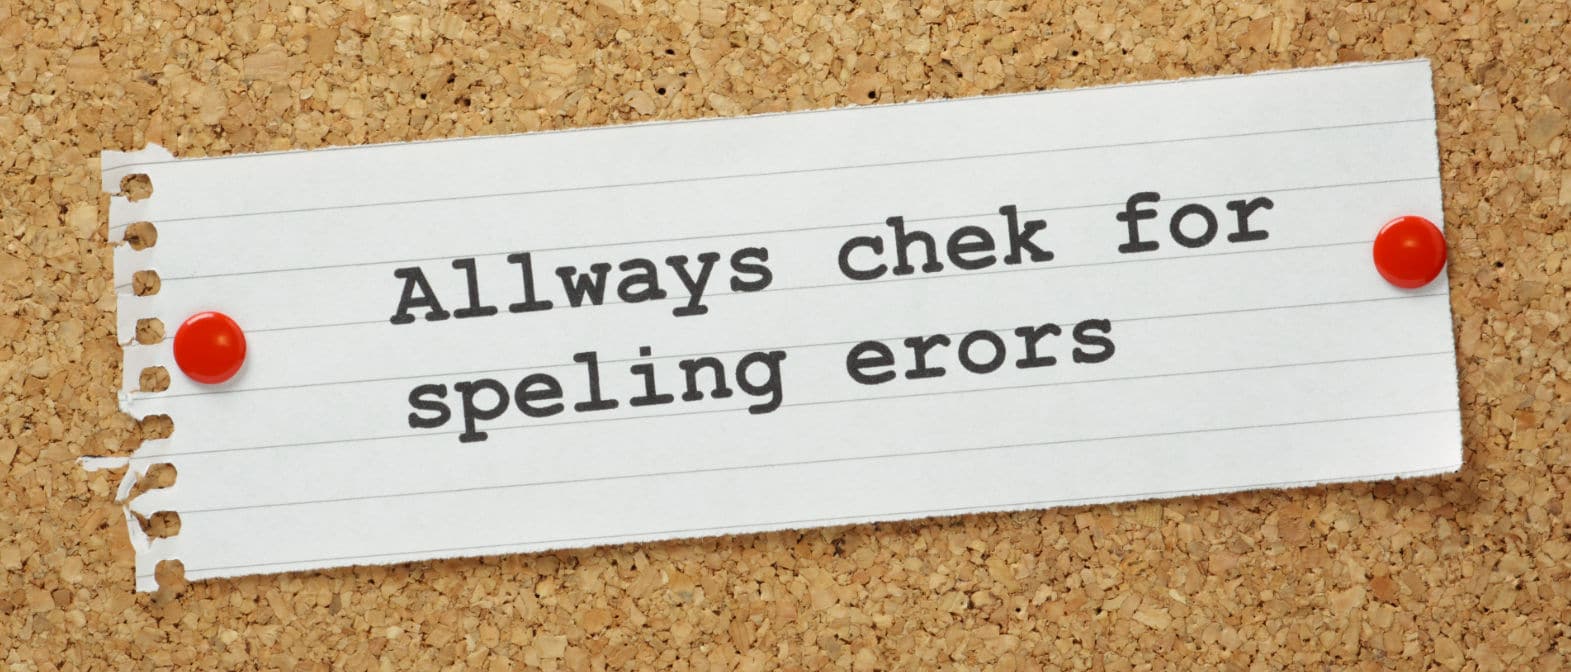 Grammar and spelling